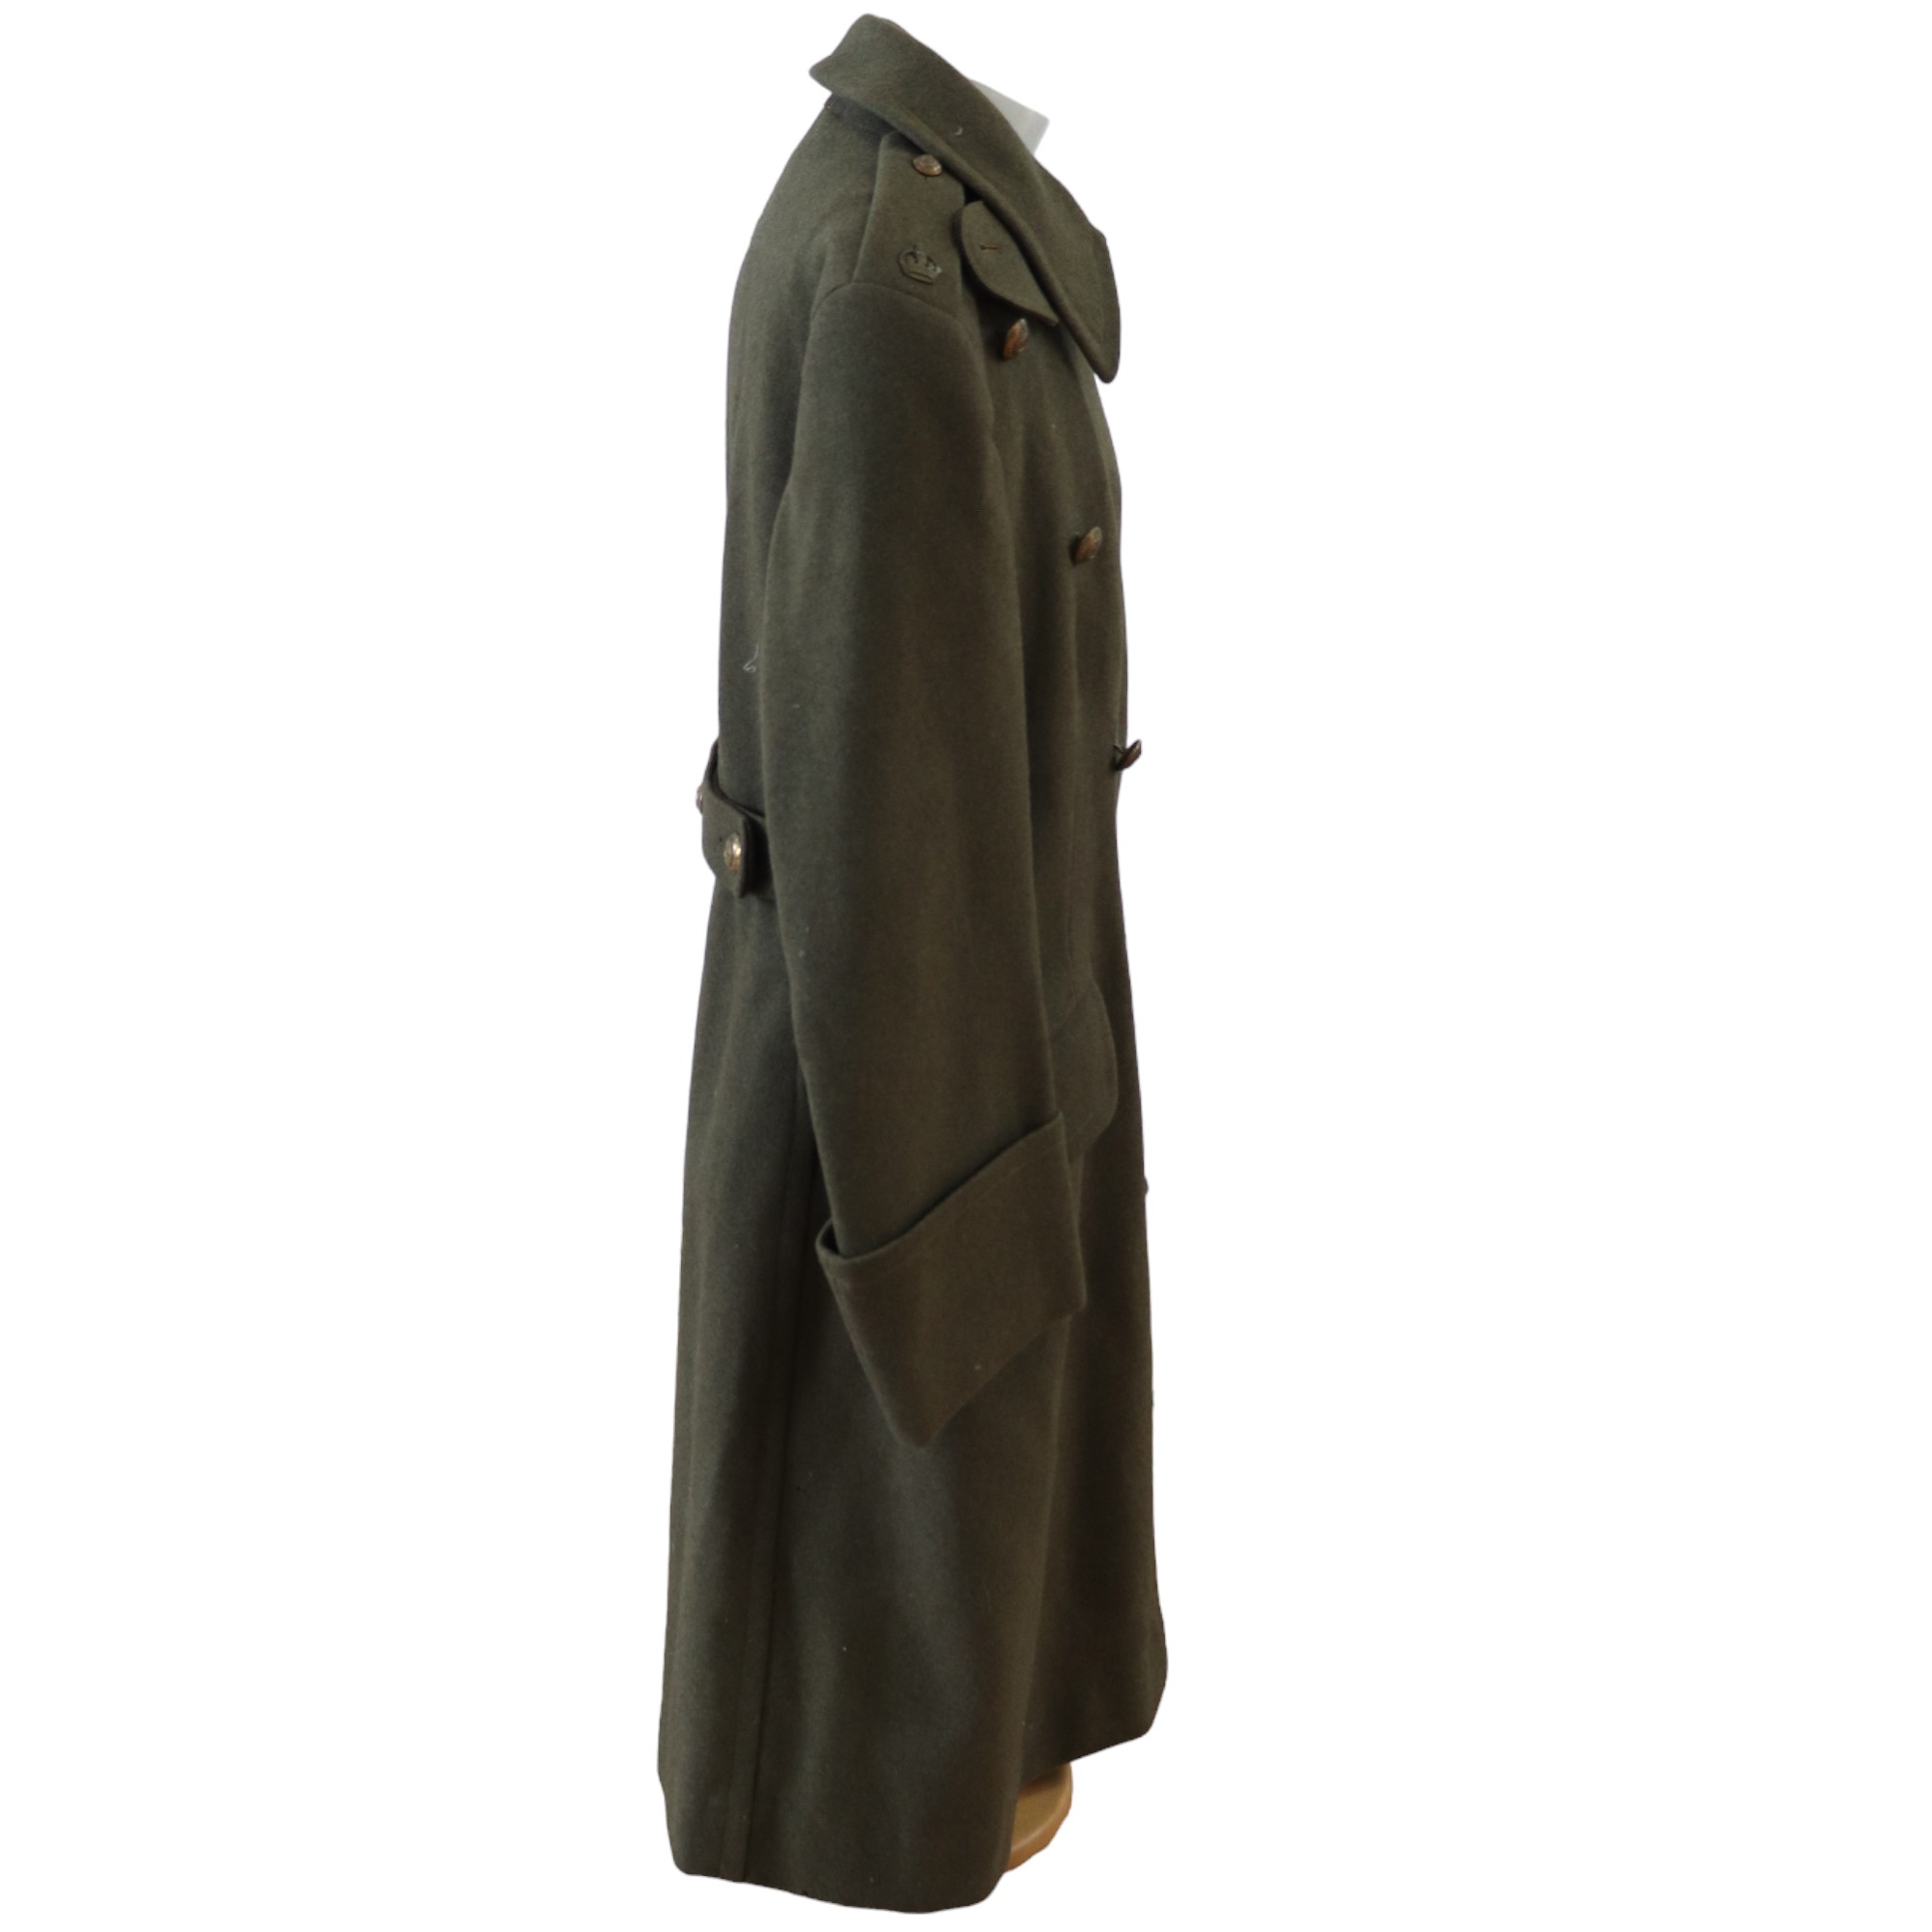 A 1943 dated army officer's greatcoat - Image 4 of 5